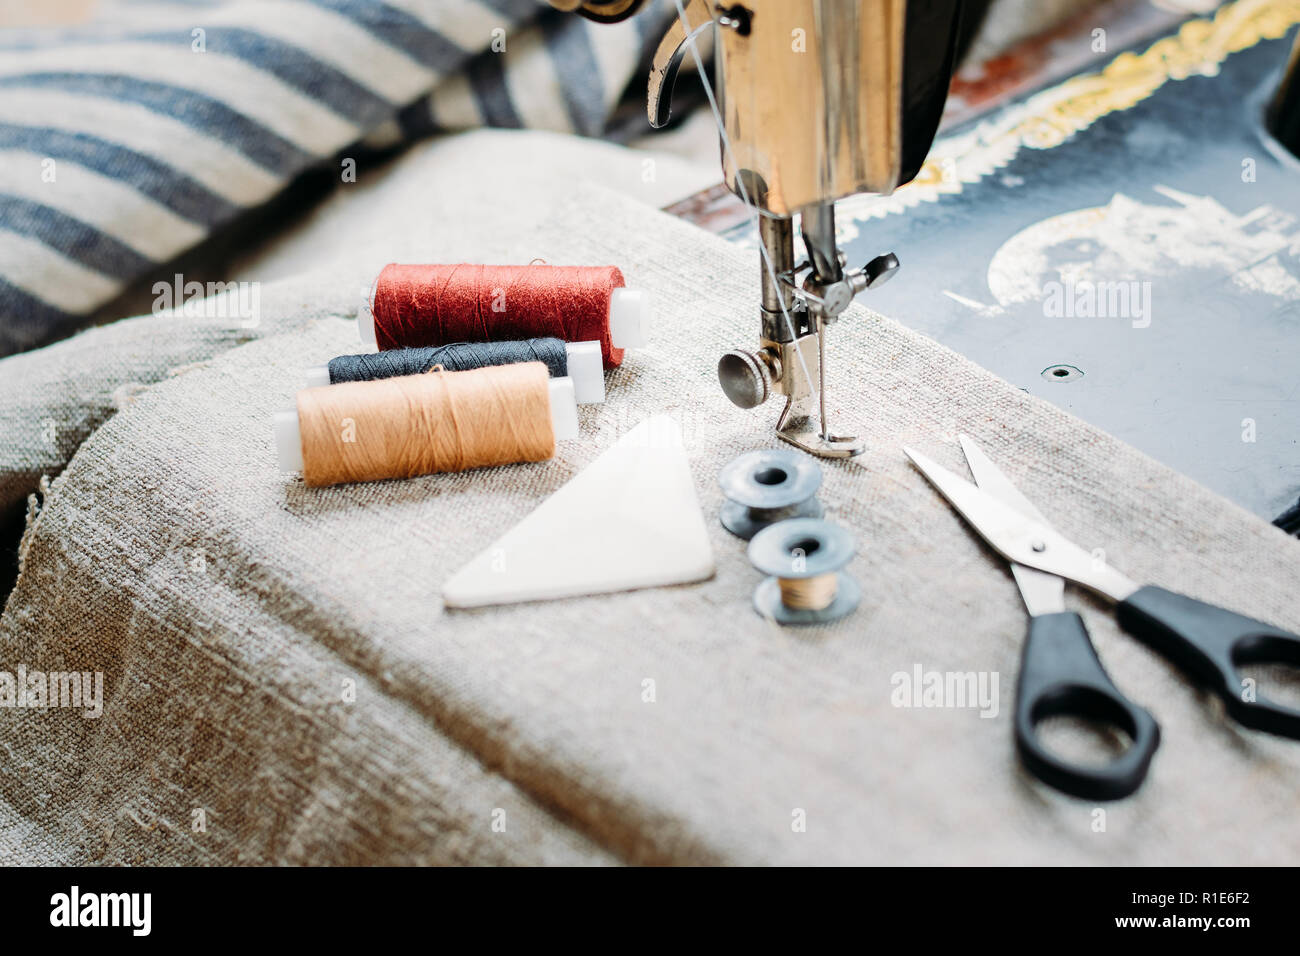 Old Sewing Accessories and Tools Stock Photo - Image of fashion, industry:  194582932